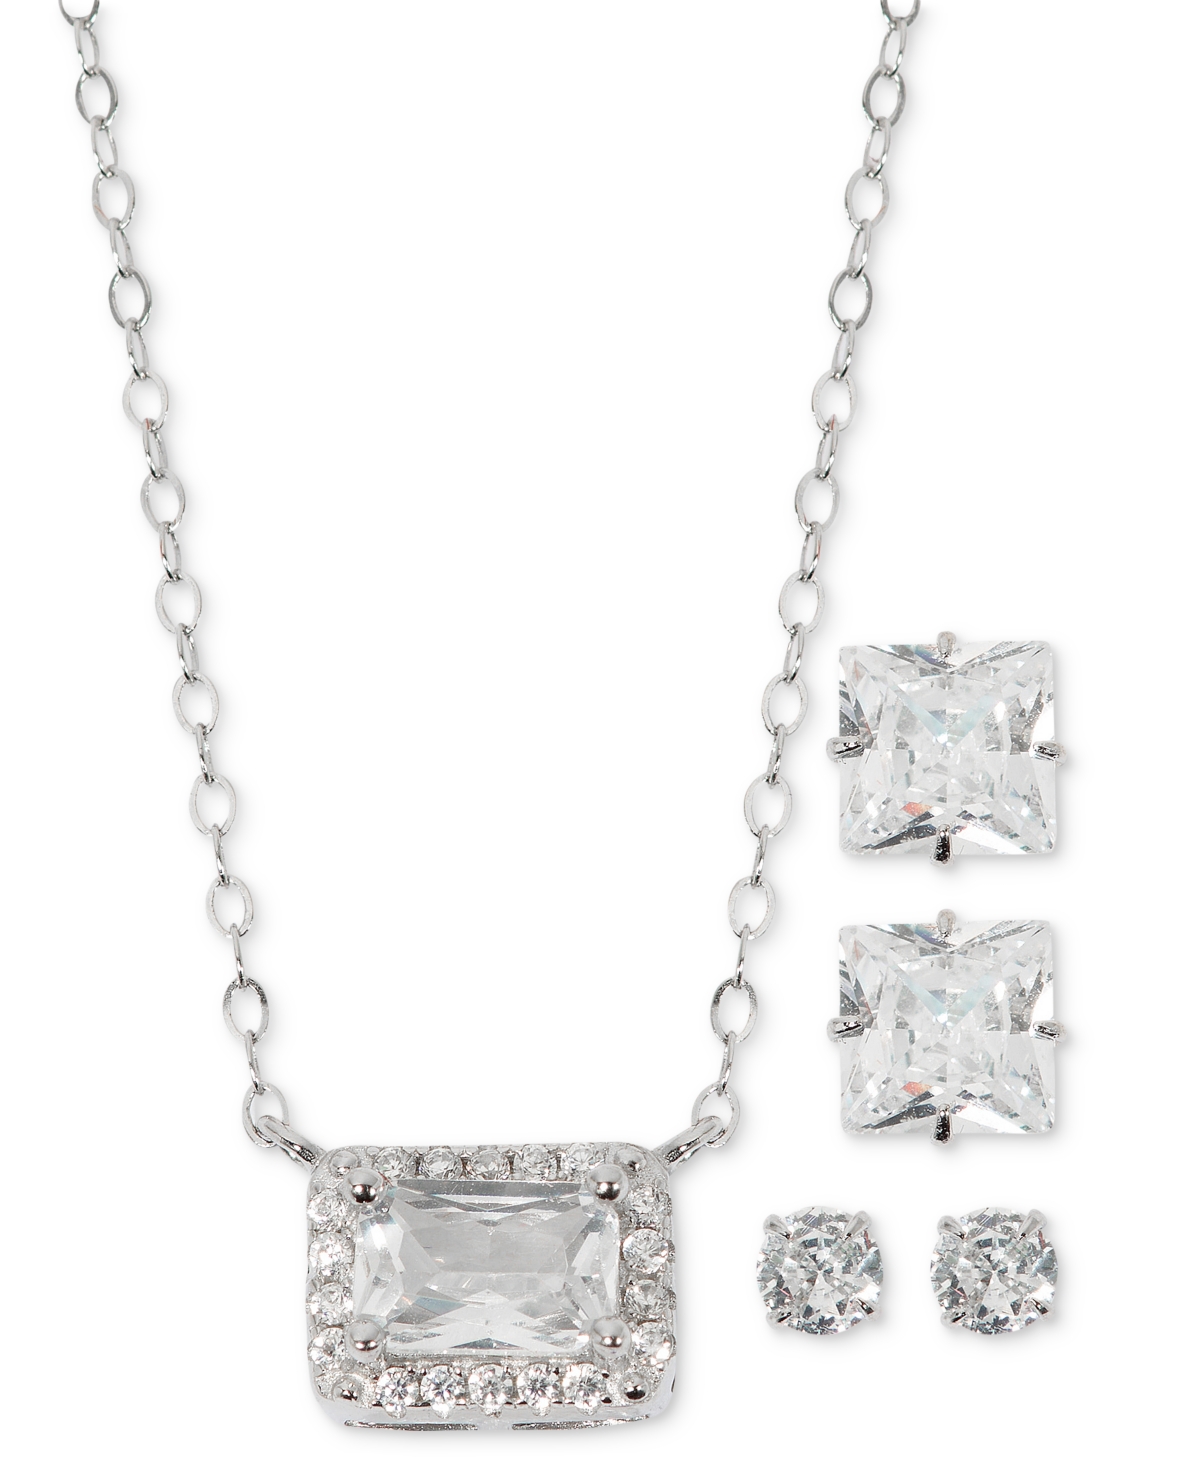 Giani Bernini 3-pc. Set Cubic Zirconia Halo Pendant Necklace & Two Pair Stud Earrings In Sterling Silver, Created